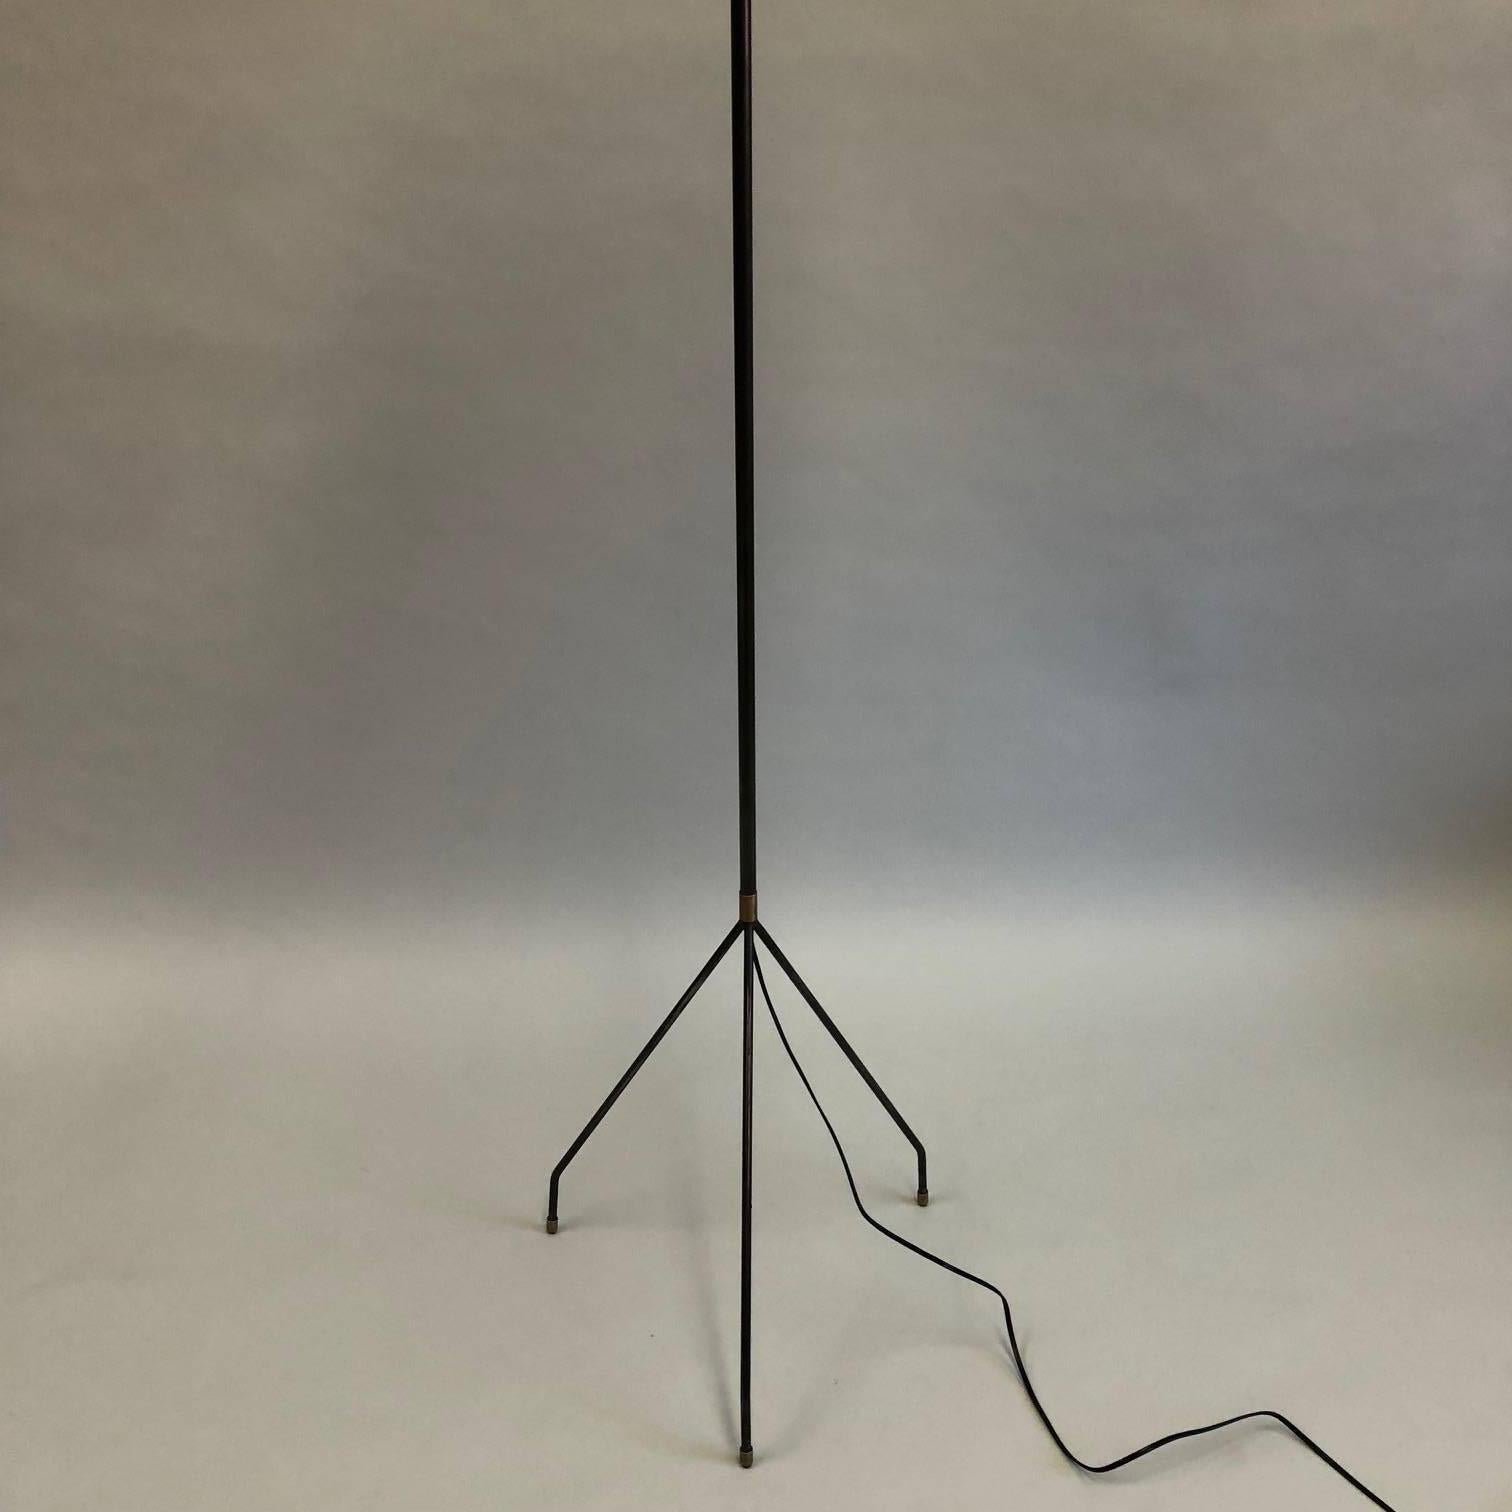 20th Century Pair of French Mid-Century Modern Iron Floor Lamps Attributed to Pierre Guariche